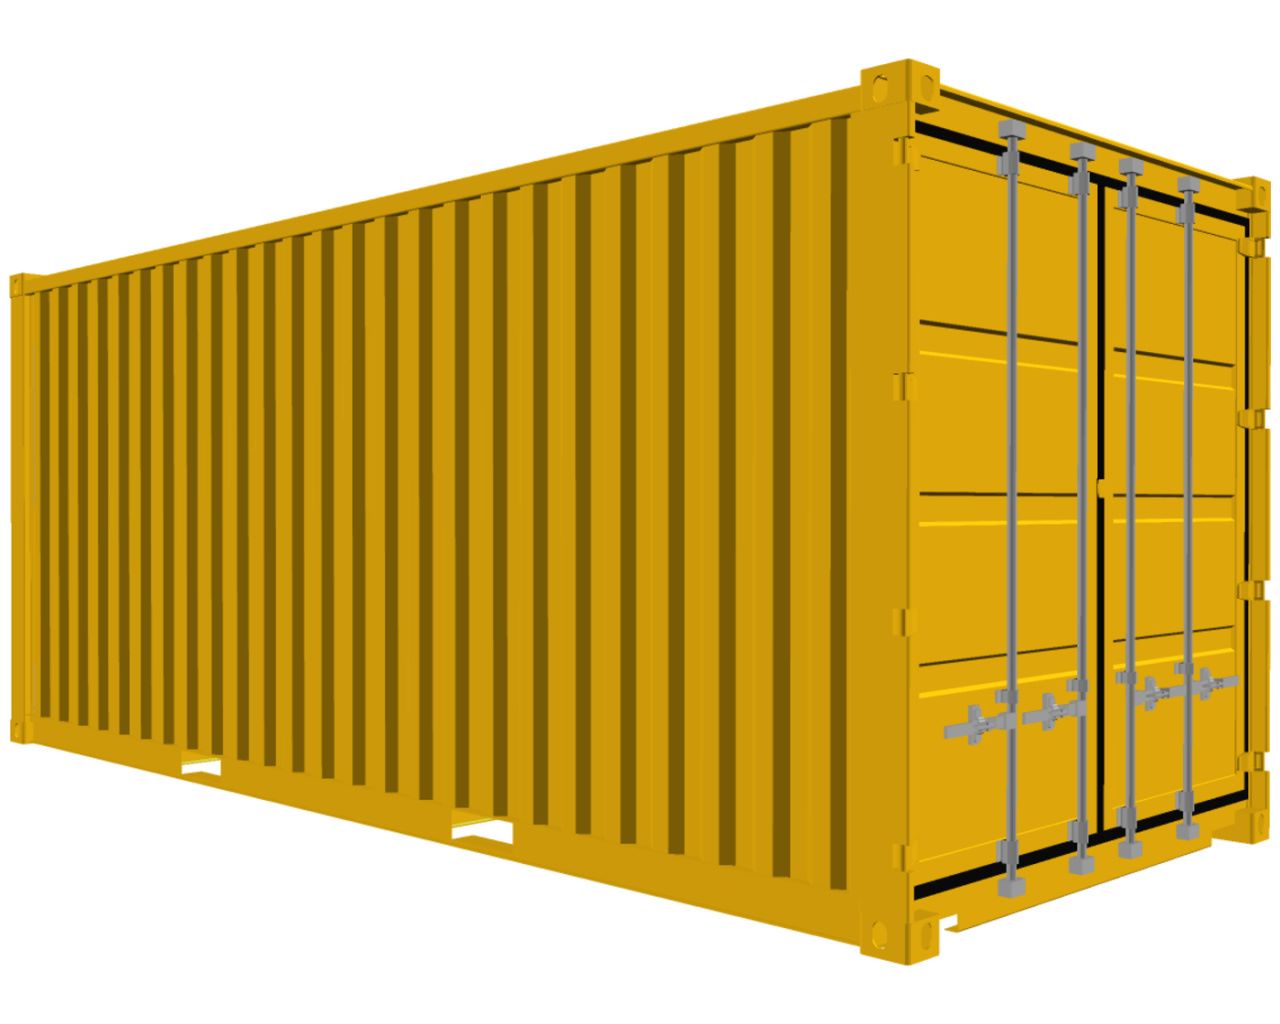 containers em geral